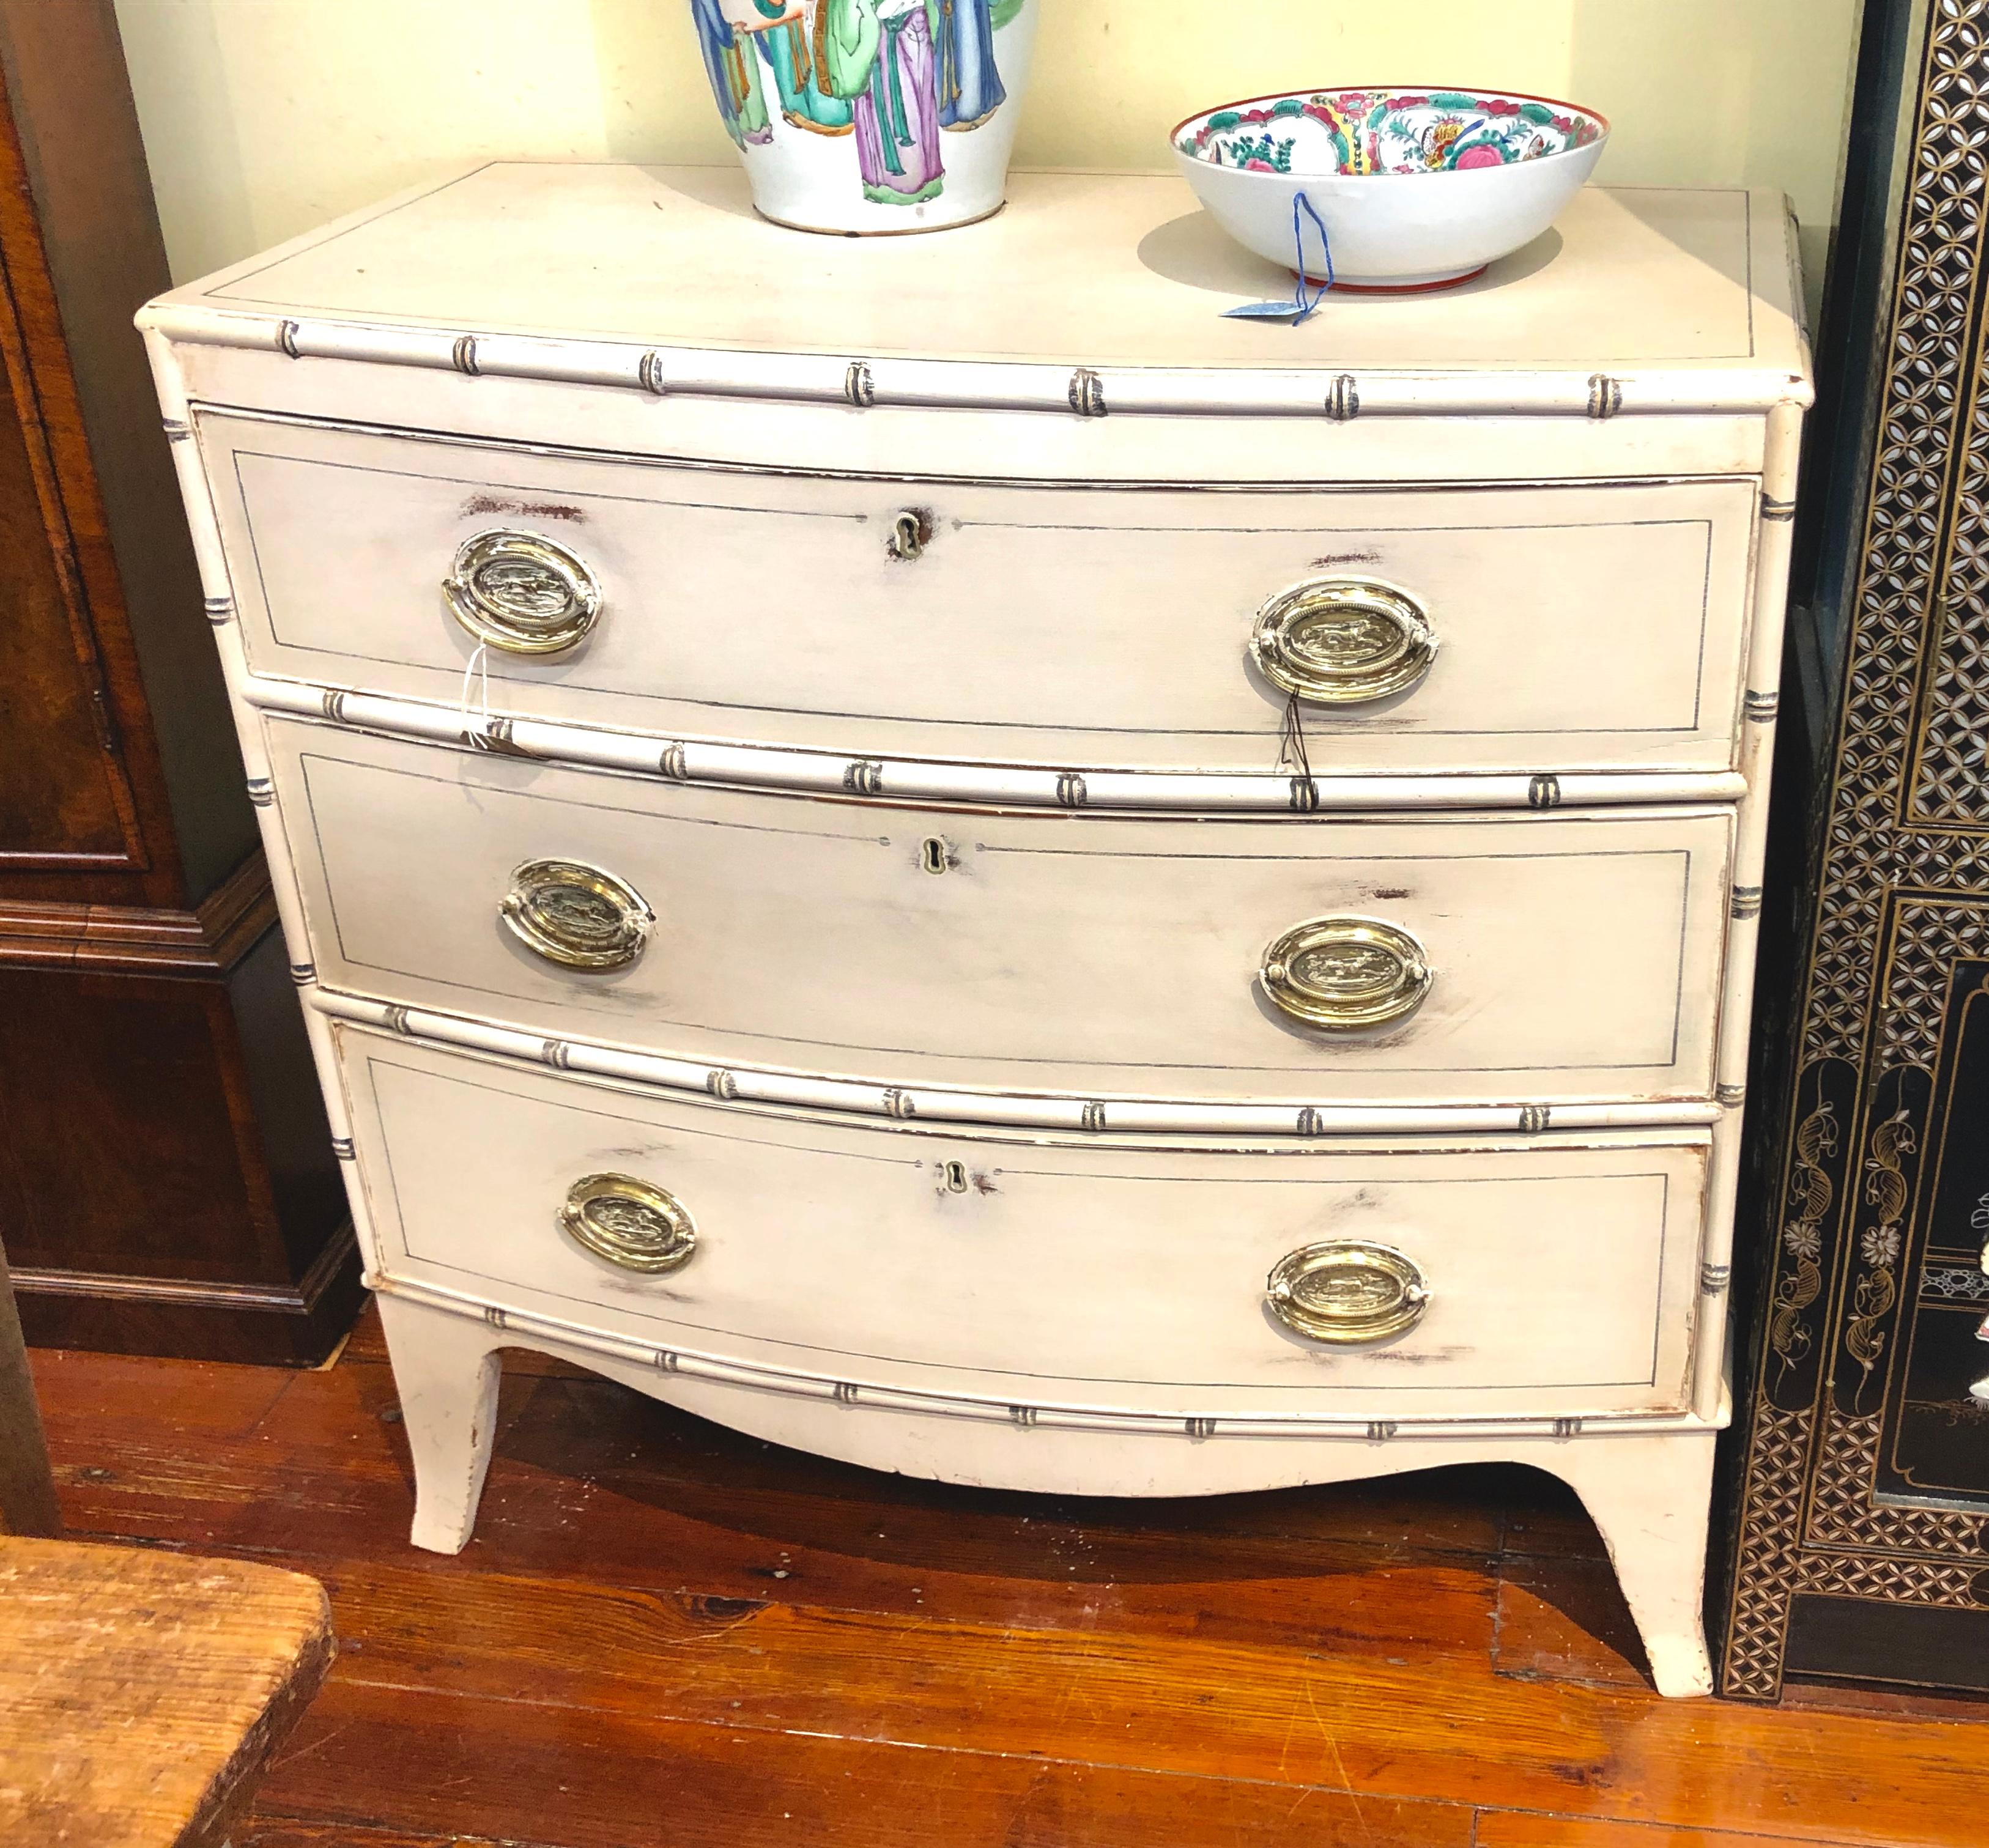 Extremely rare and fine  NEAR pair antique English Regency period painted (over mahogany) small Bowfront chests with Faux Bamboo mouldings along top edge and drawer edge. Pairs of period chests are nearly impossible to find.
These period chests are